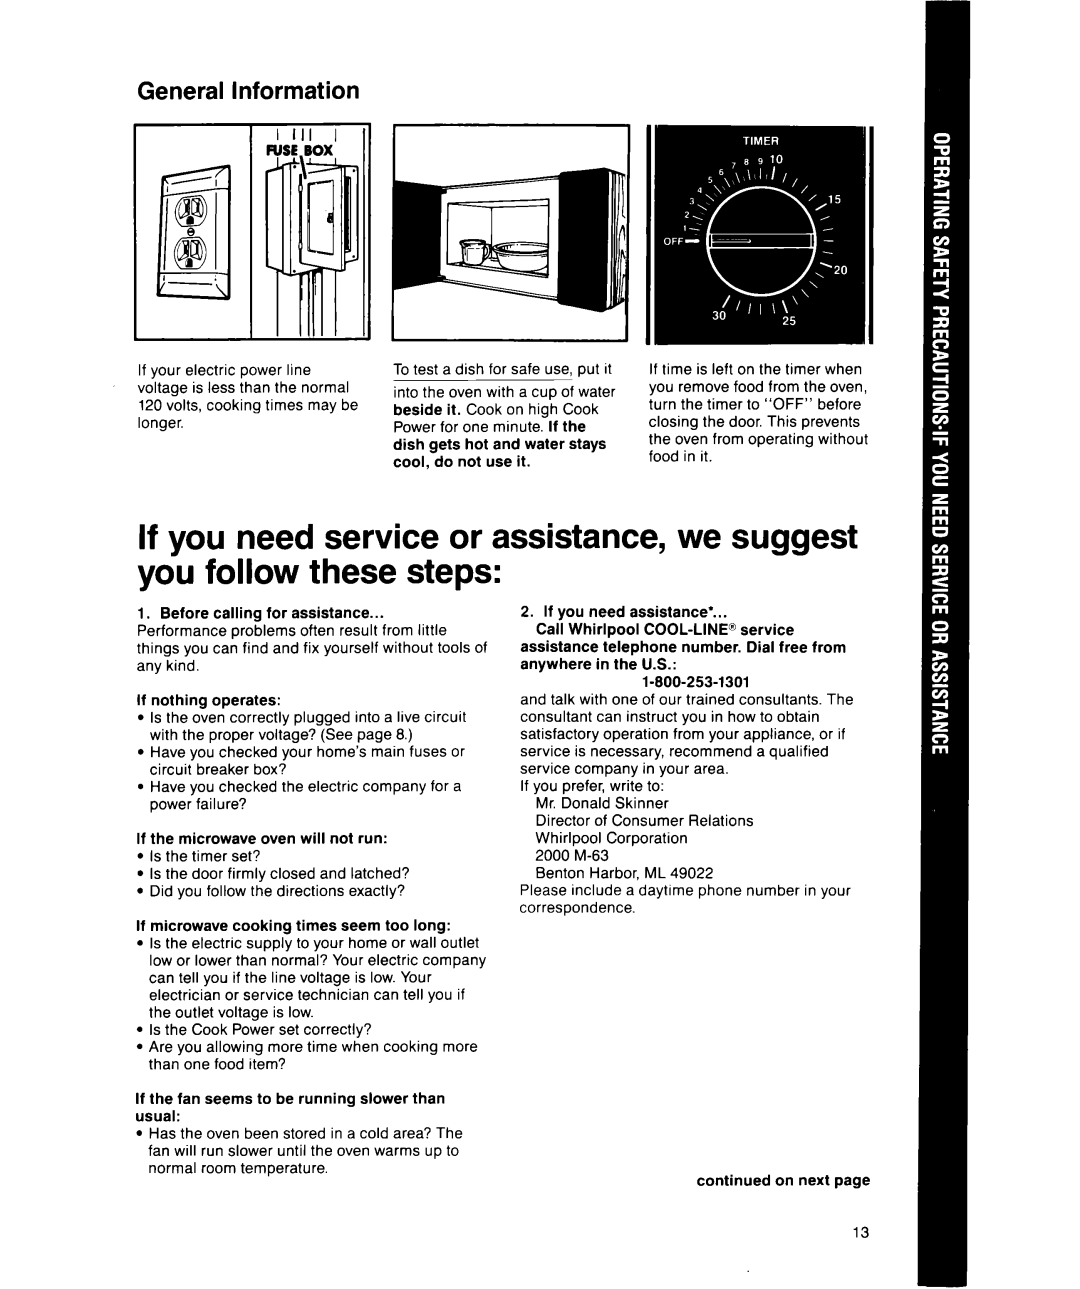 Whirlpool MS1600XW manual General Information 